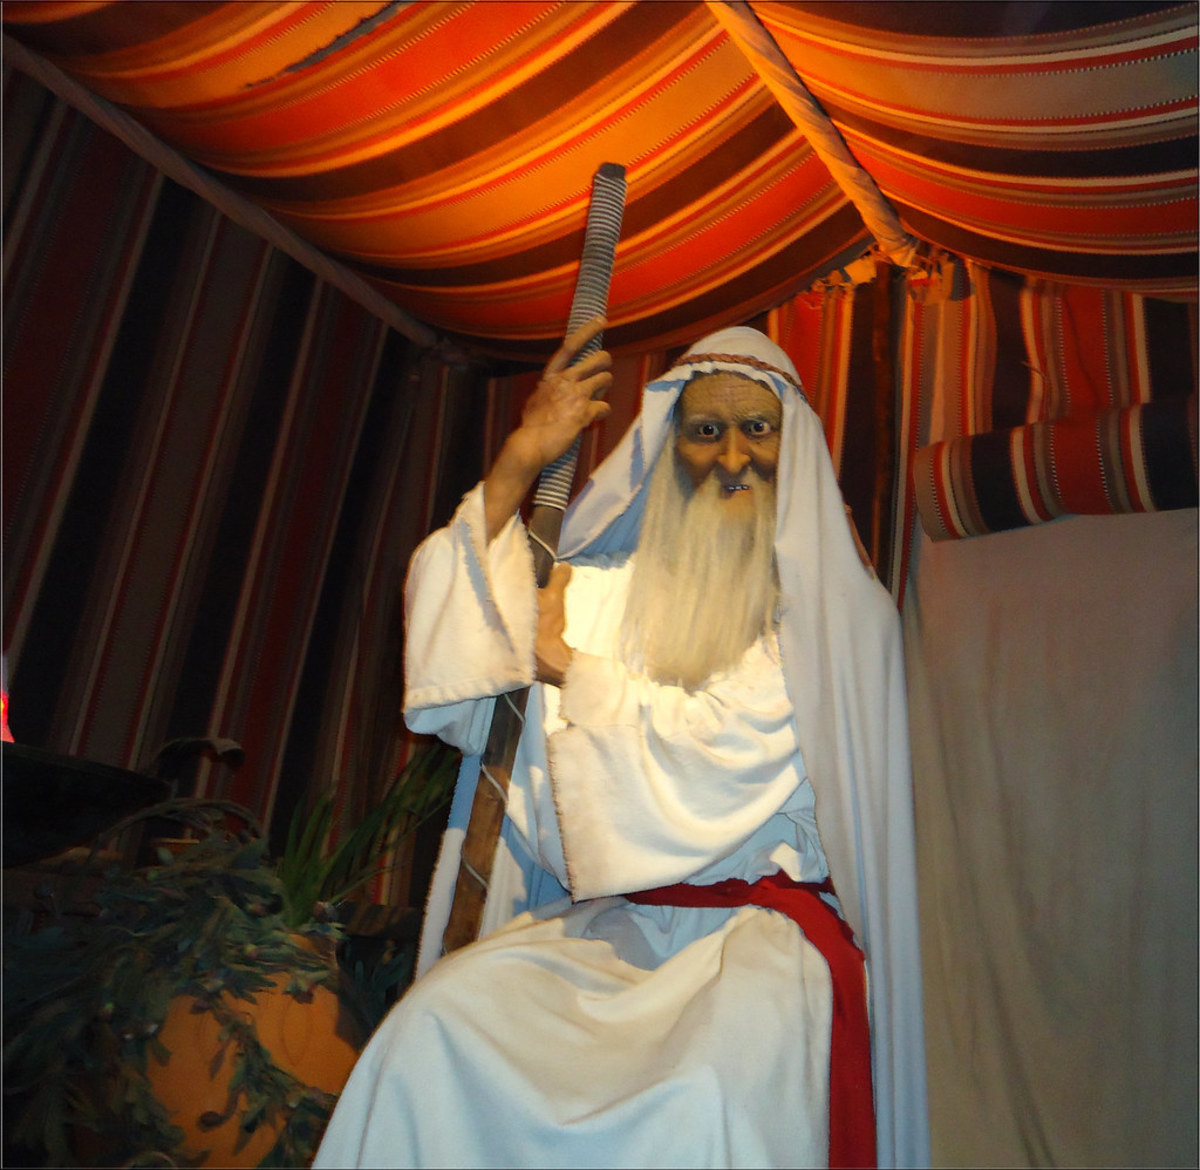 Longest Living Human:  An artist's rendering of Methuselah, the longest-living man in the Holy Bible. He lived 969 years, according to biblical sources.